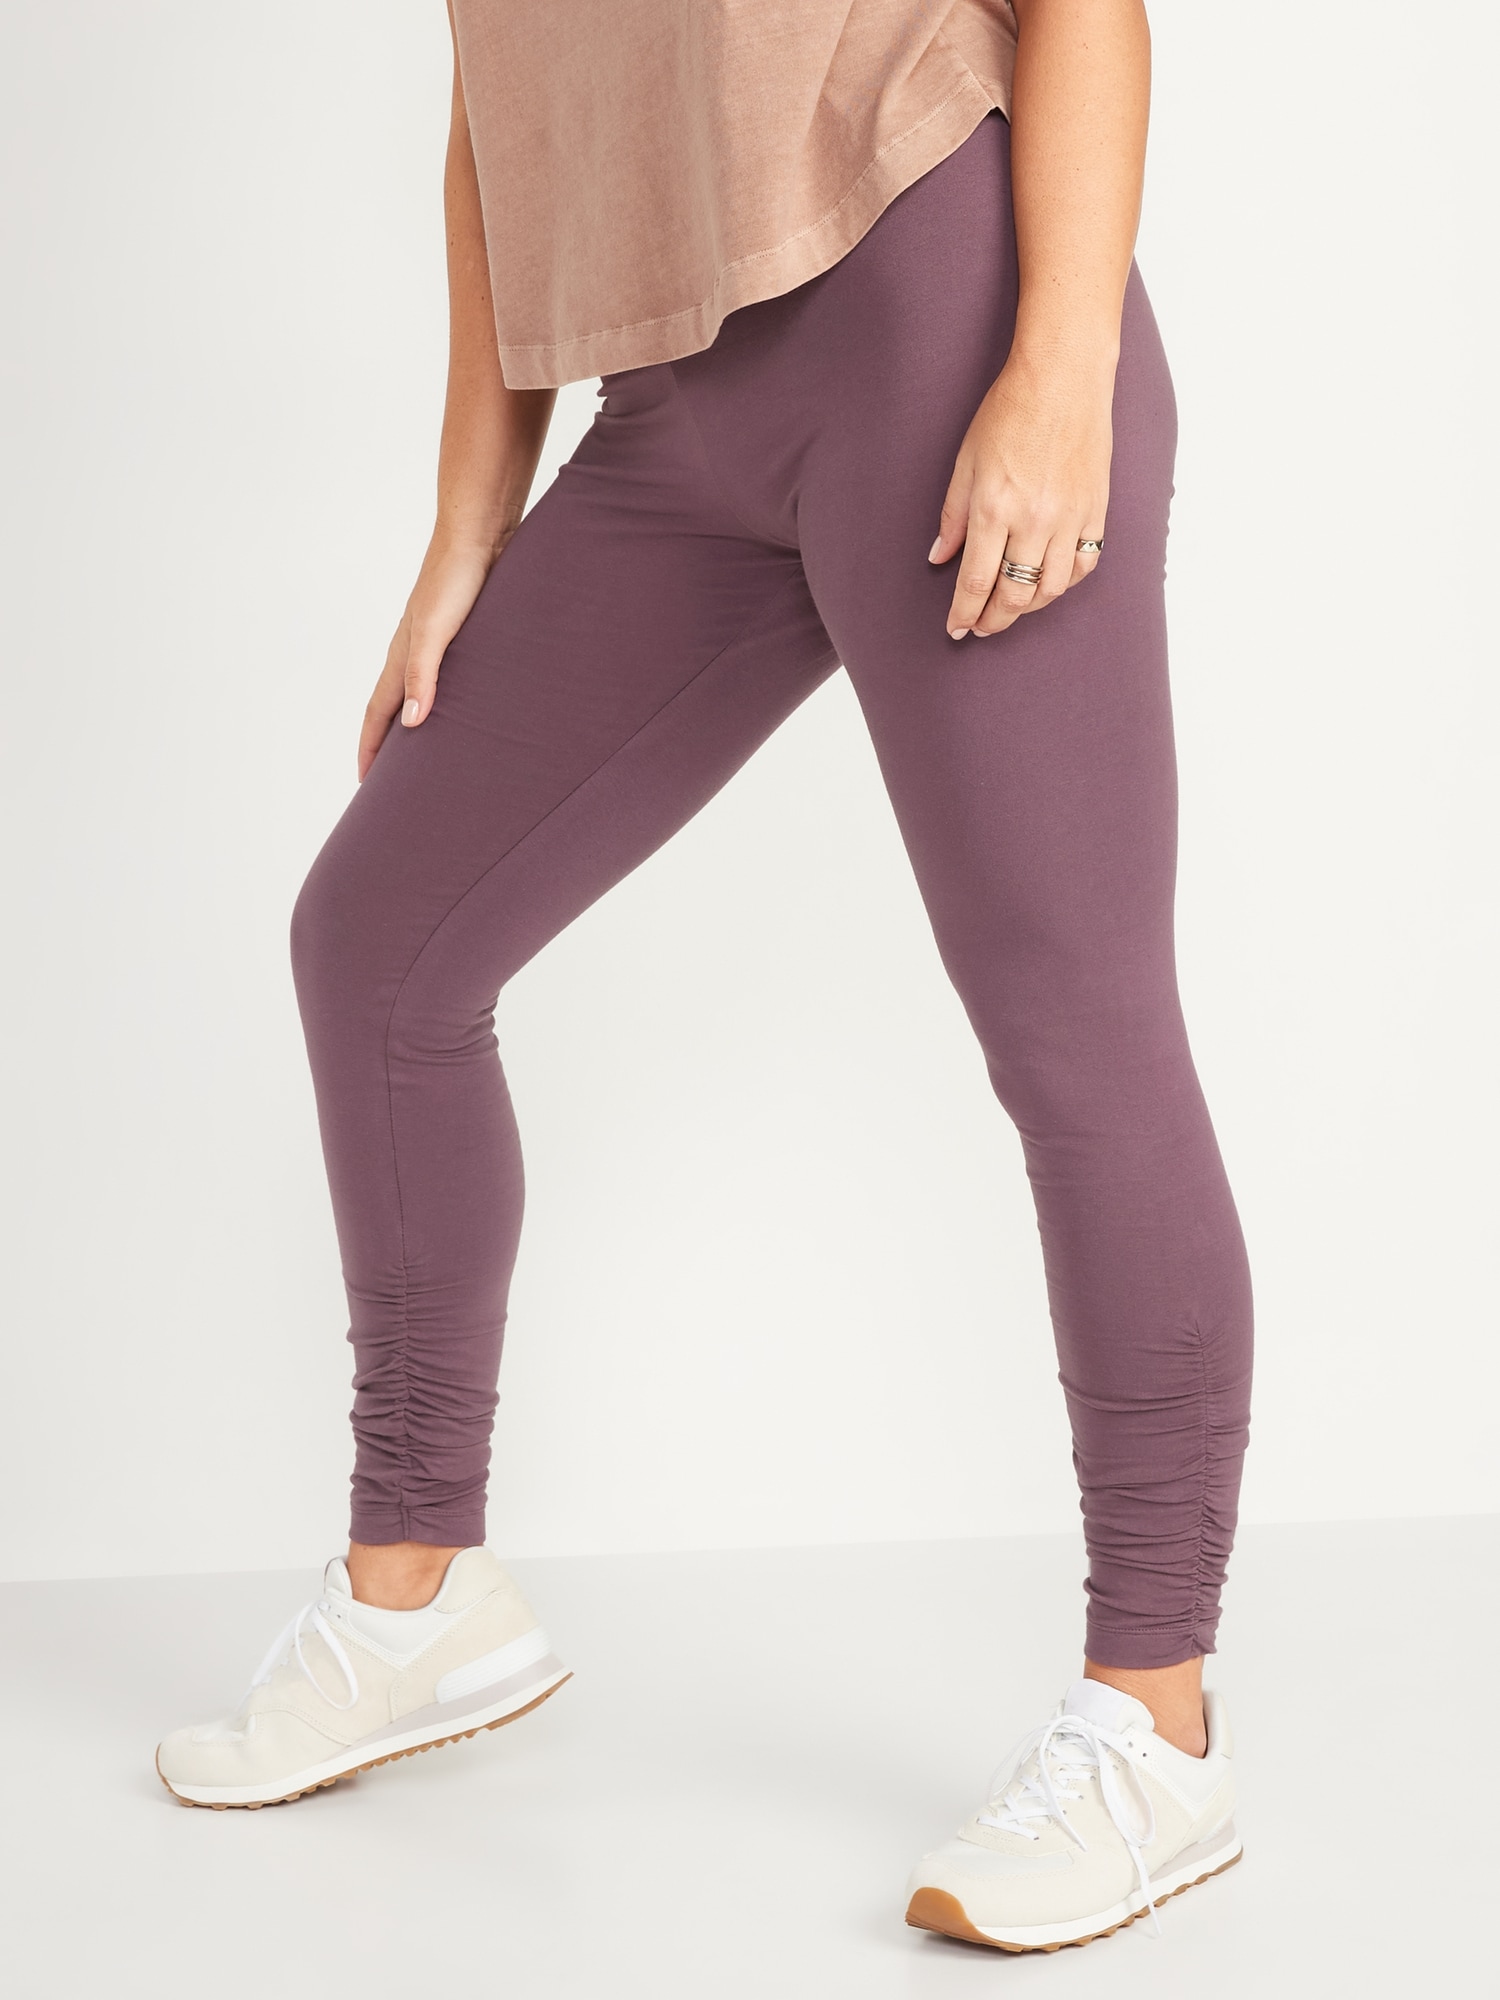 High-Waisted Ruched Ankle-Length Leggings for Women